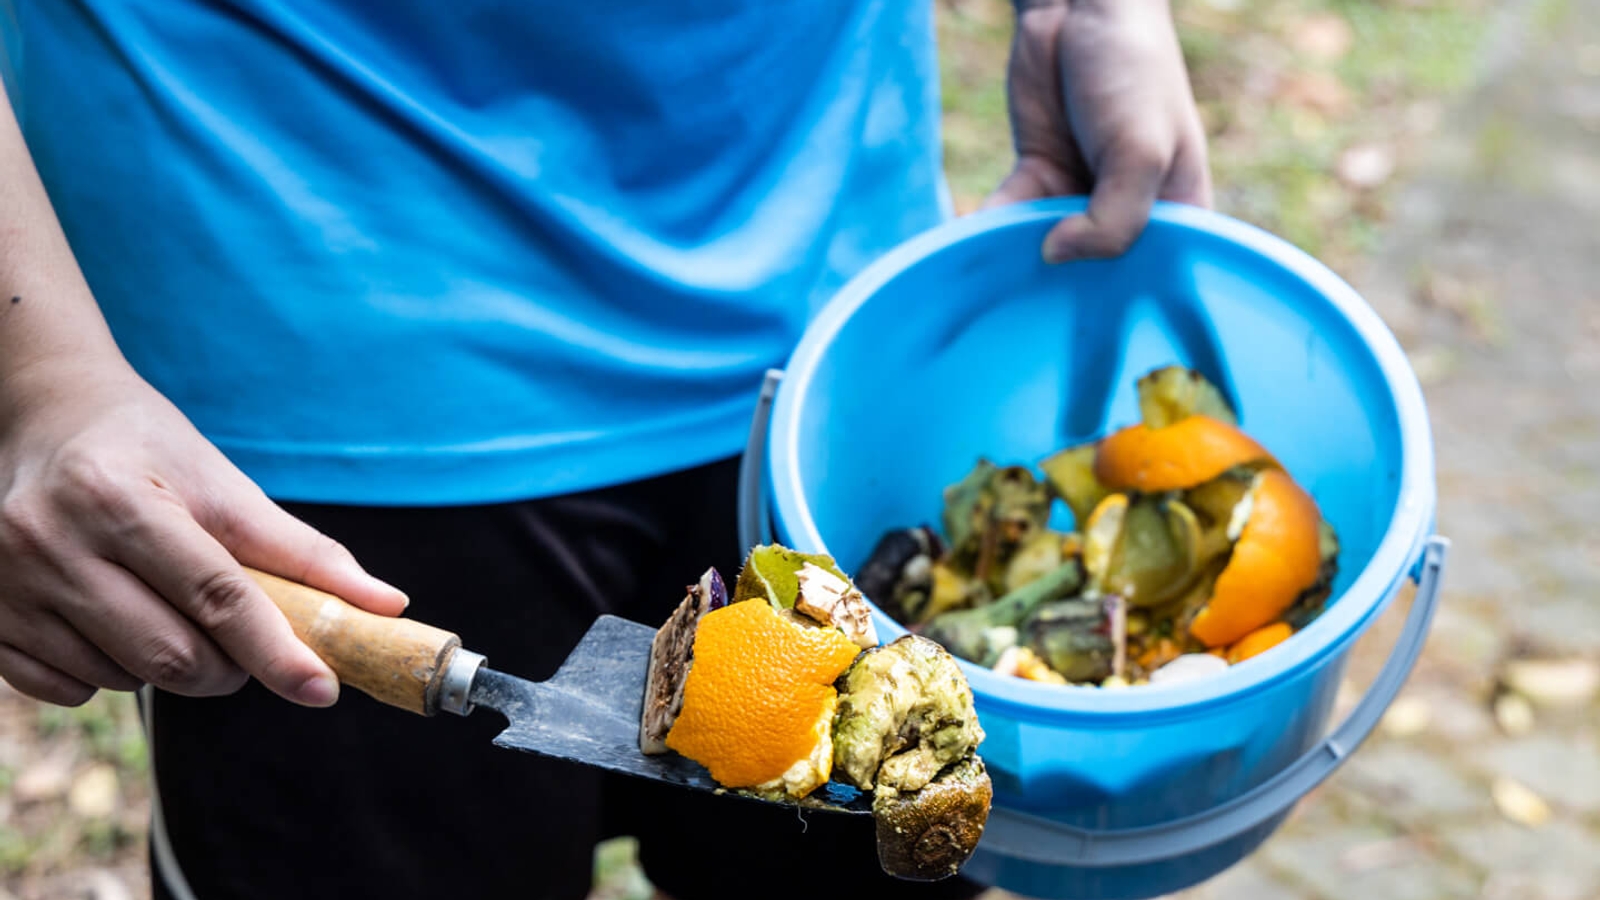 A person holding a blue bucket and garden trowel, disposing of kitchen waste like fruit and vegetable scraps into it, likely for composting.